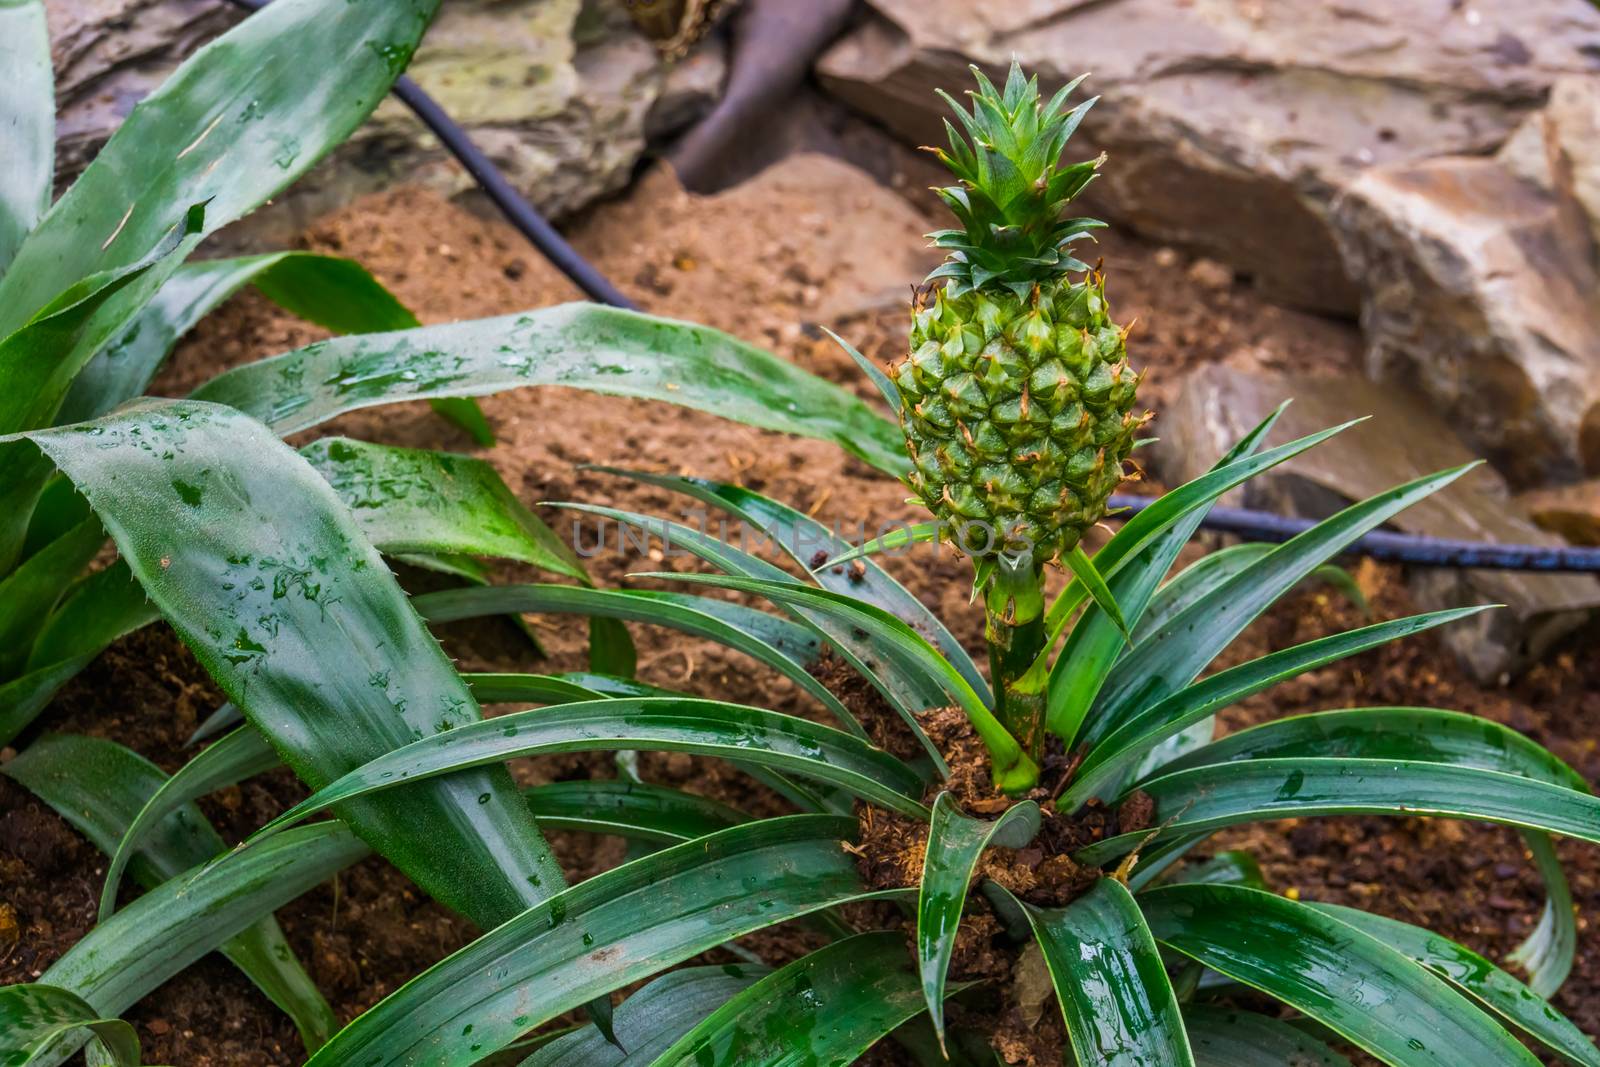 unripe pineapple growing a plant, edible fruits, popular tropical specie from America